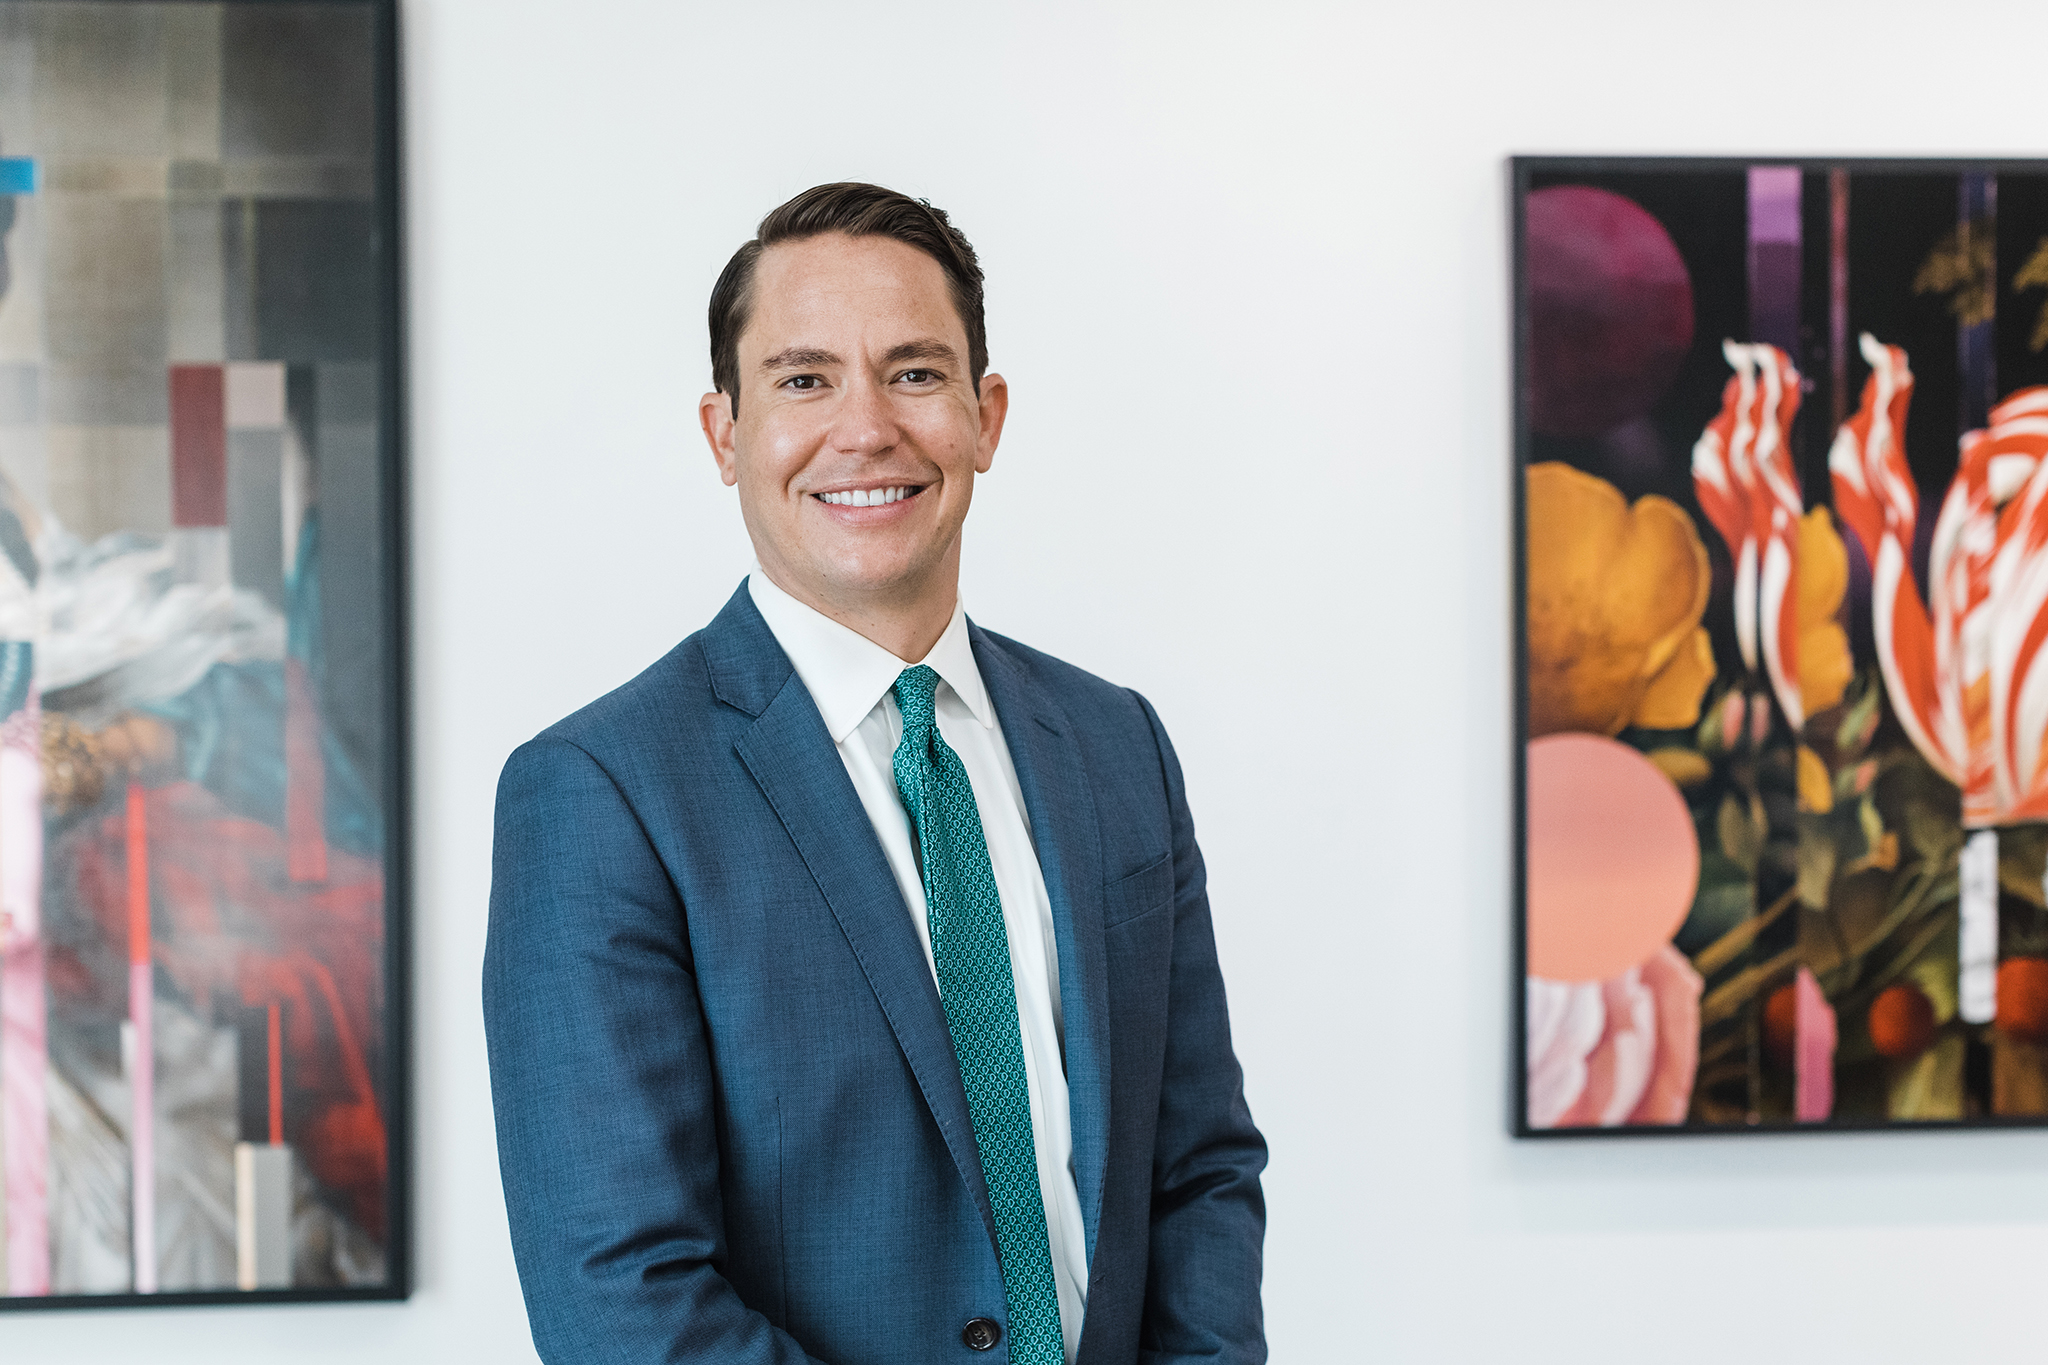 Dallas Headshots photo of a man in a blue suit in front of a white background surrounded by two paintings